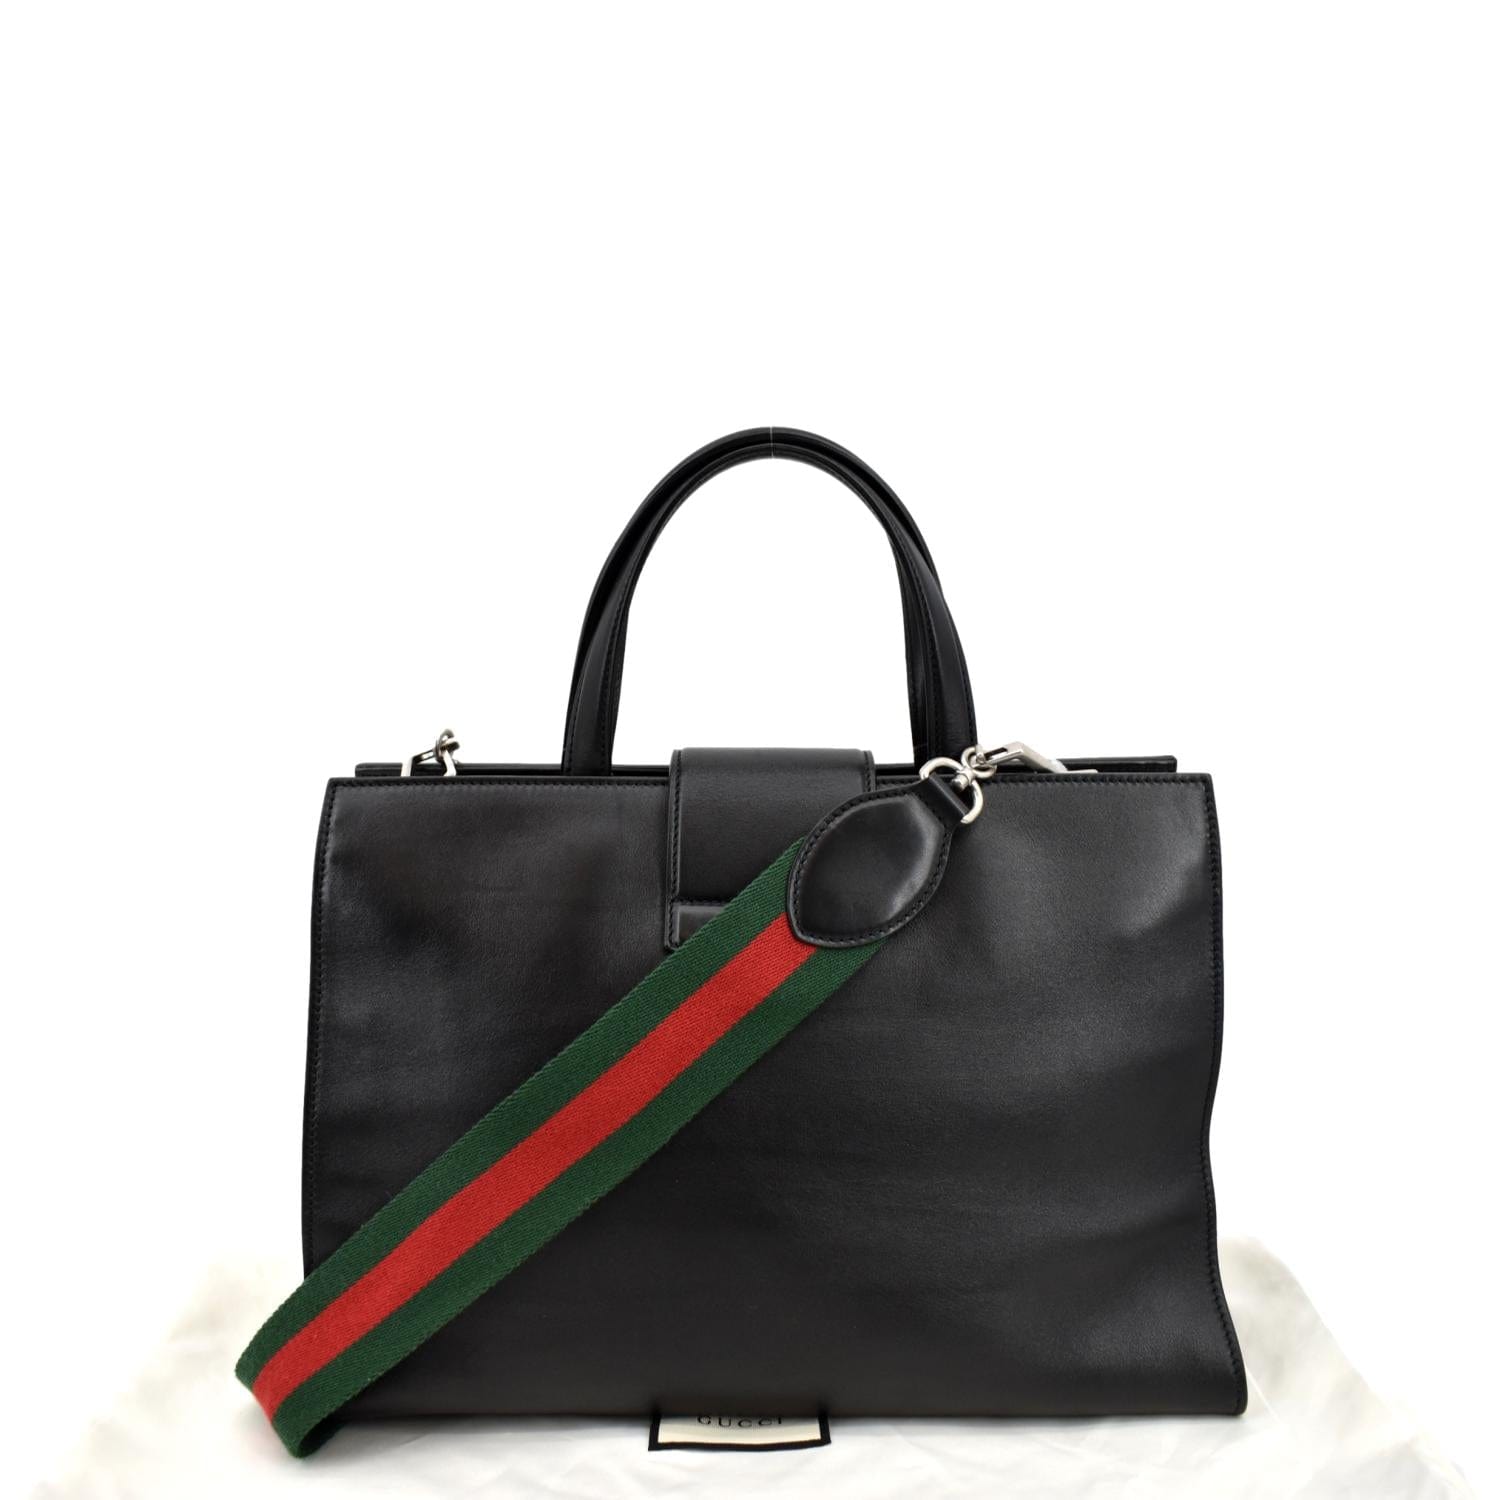 Gucci Dionysus Leather Tote Bag in Black Color